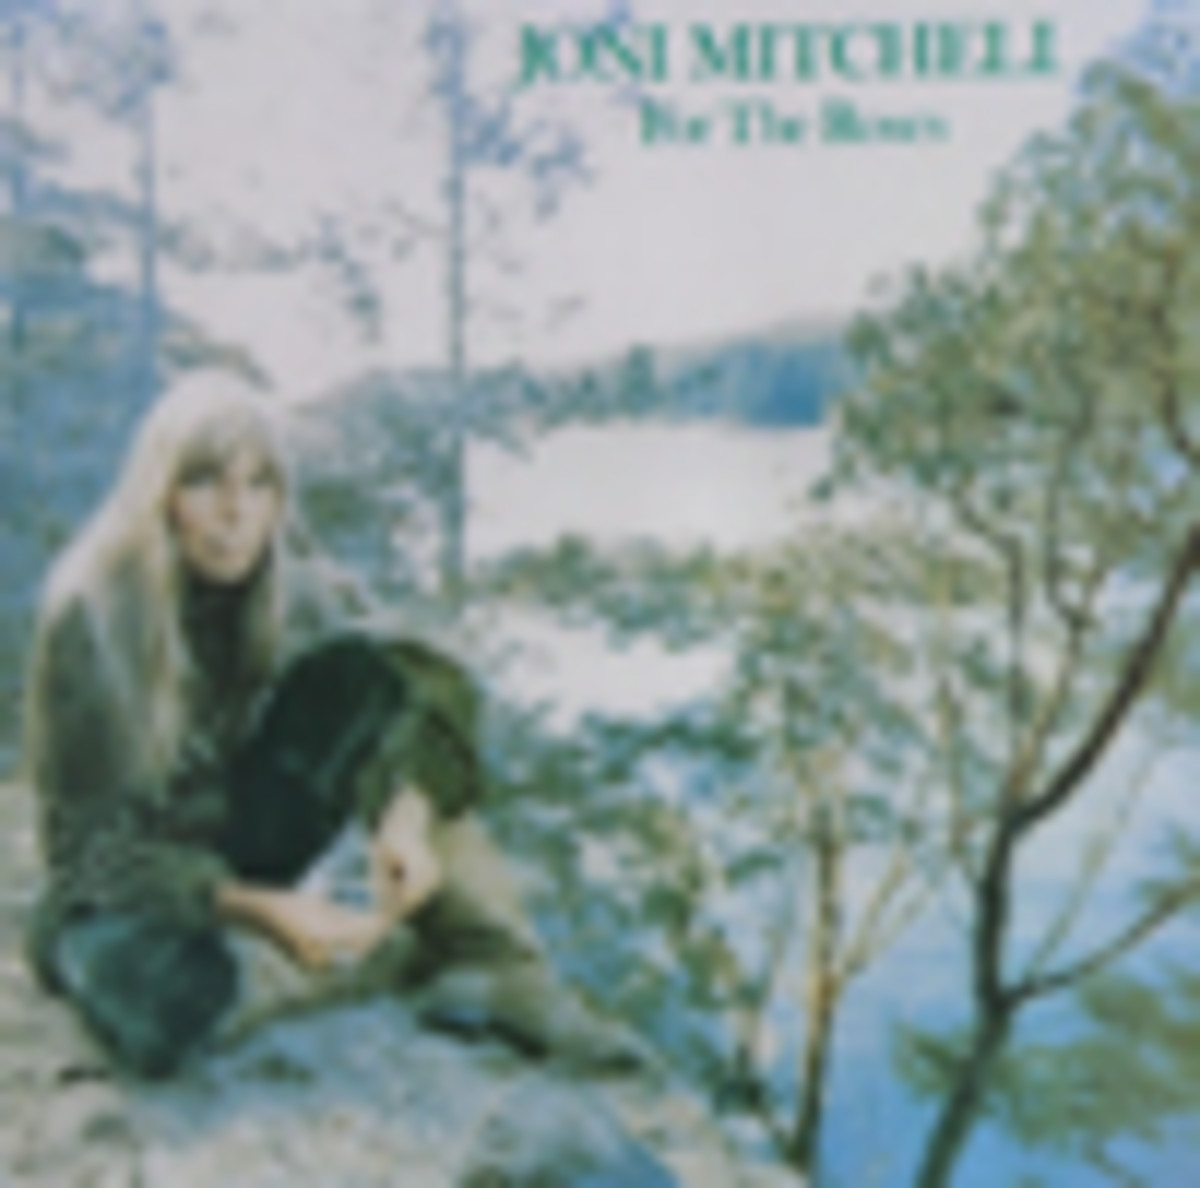 Joni Mitchell For The Roses